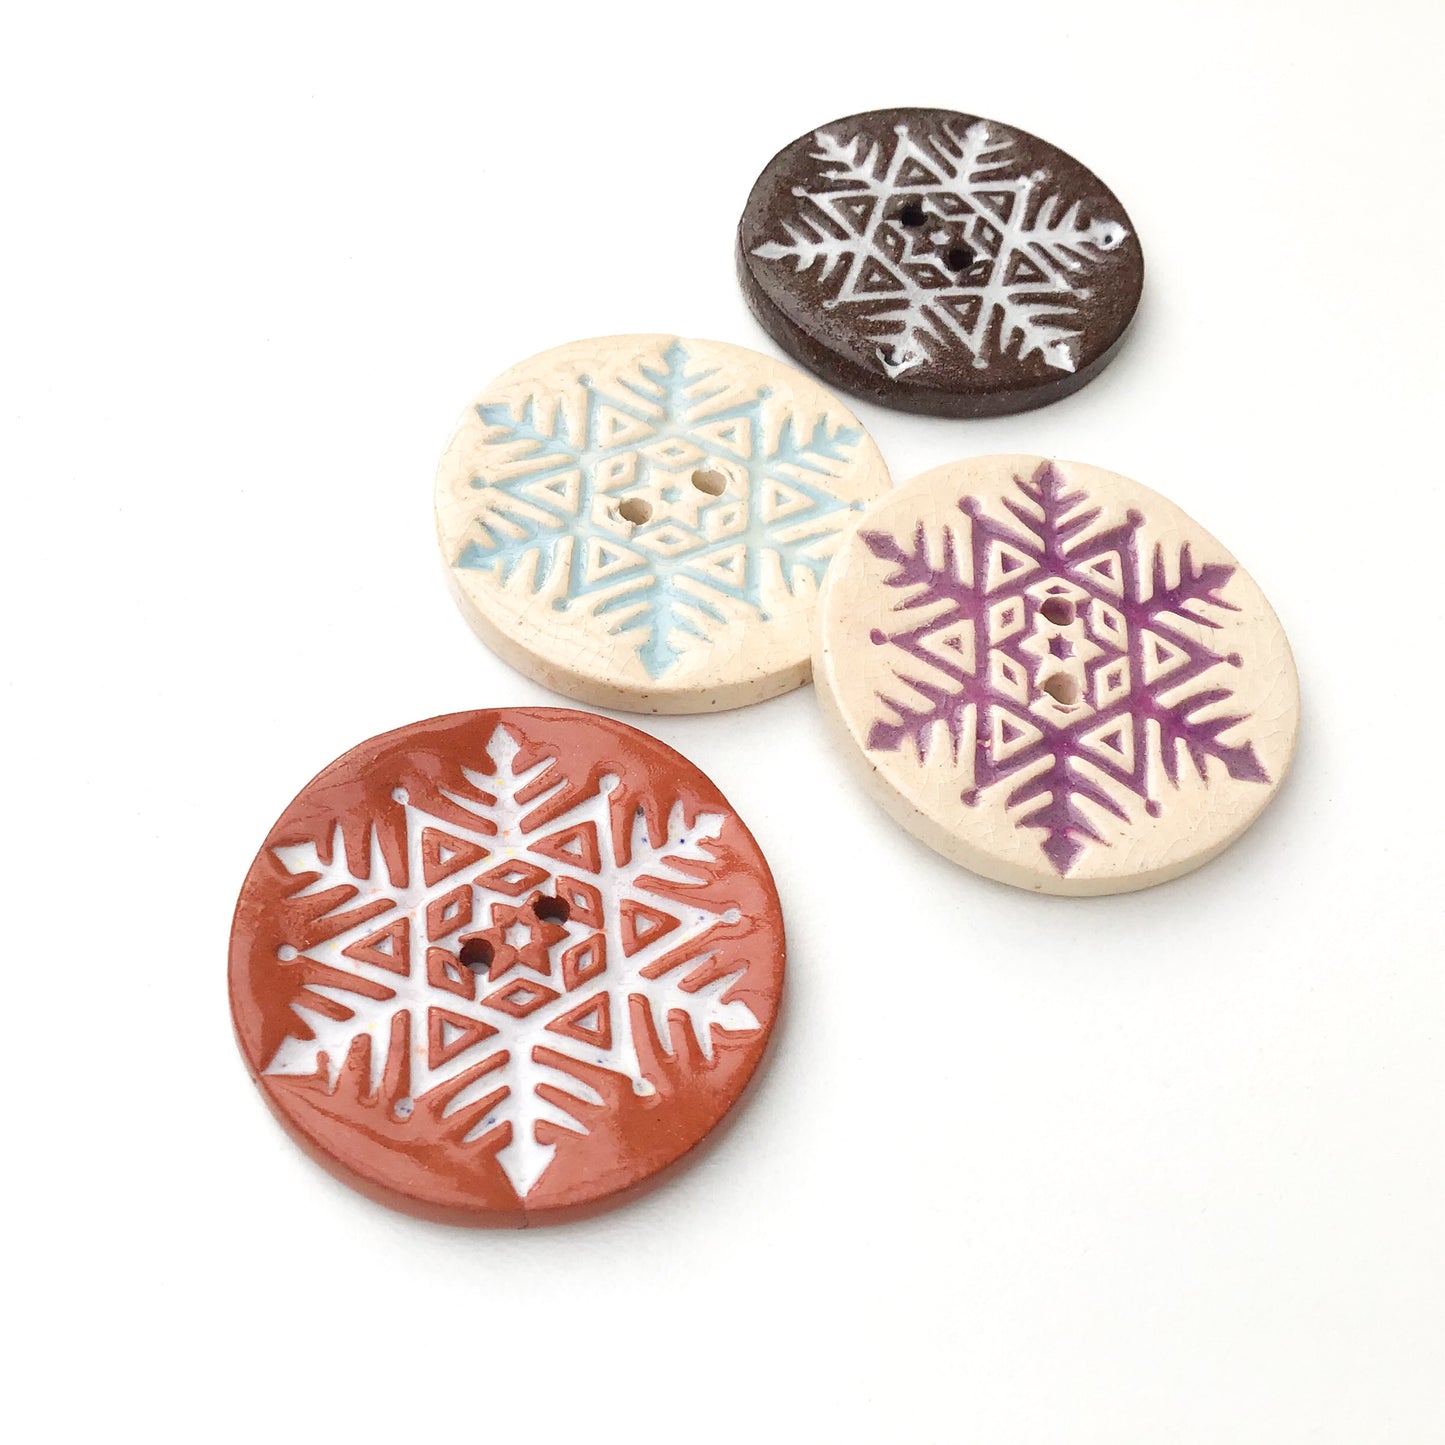 Large Snowflake Button - Hand Stamped Ceramic Snowflake Button - 1 1/2"